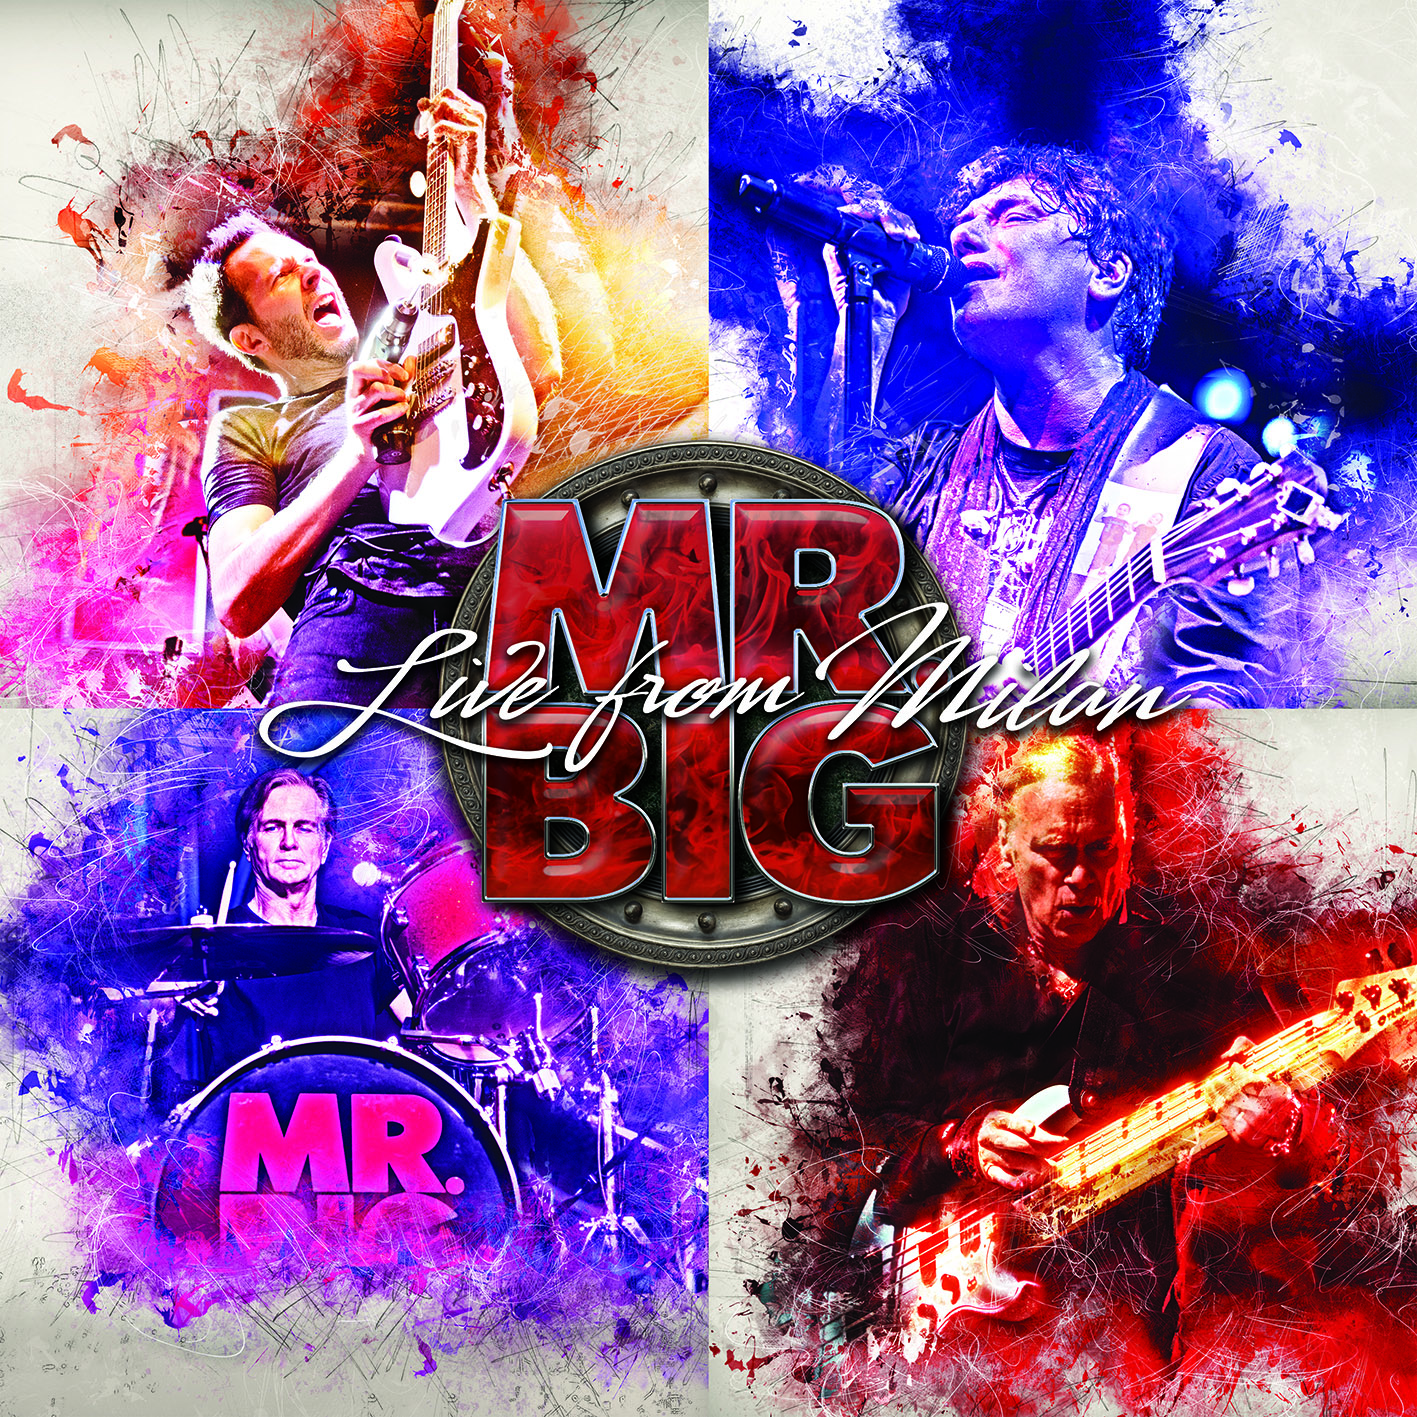 MR. BIG - Live From Milan